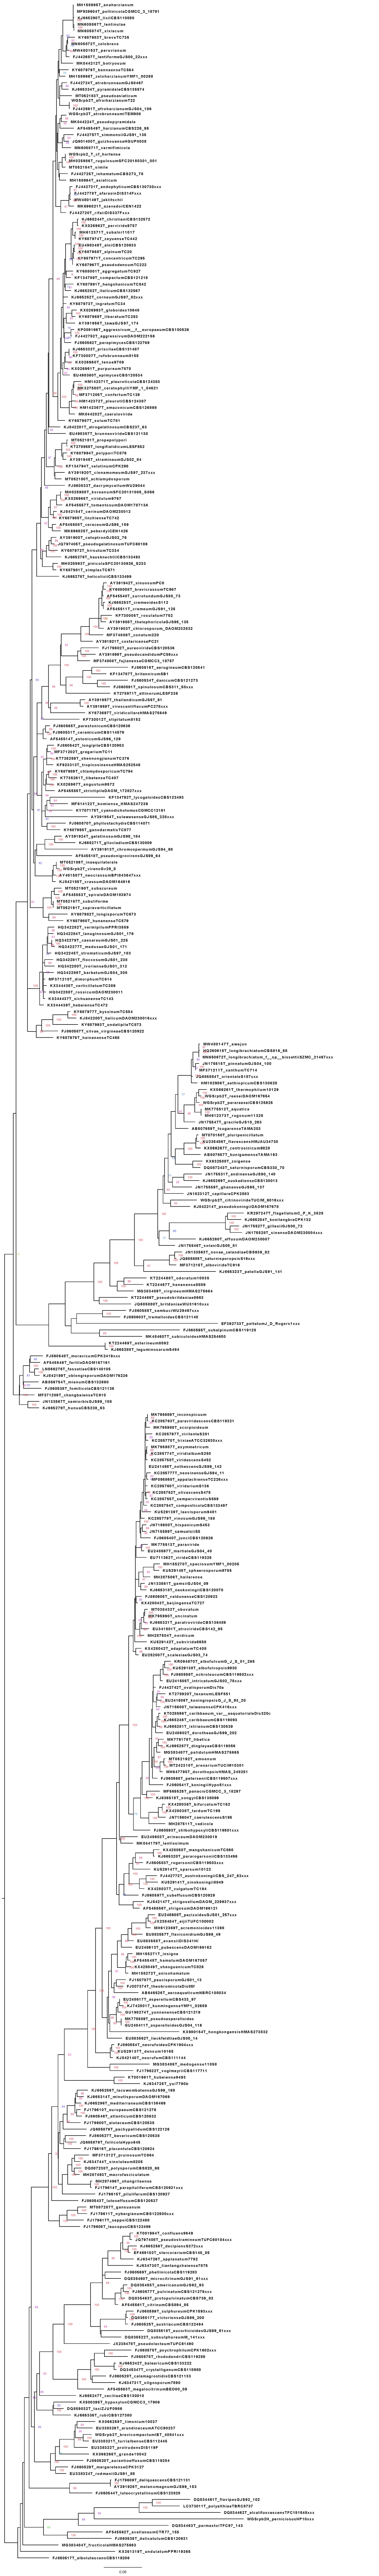 The most complete rpb2 Trichoderma tree with 391 RefSeq (May 10, 2022)